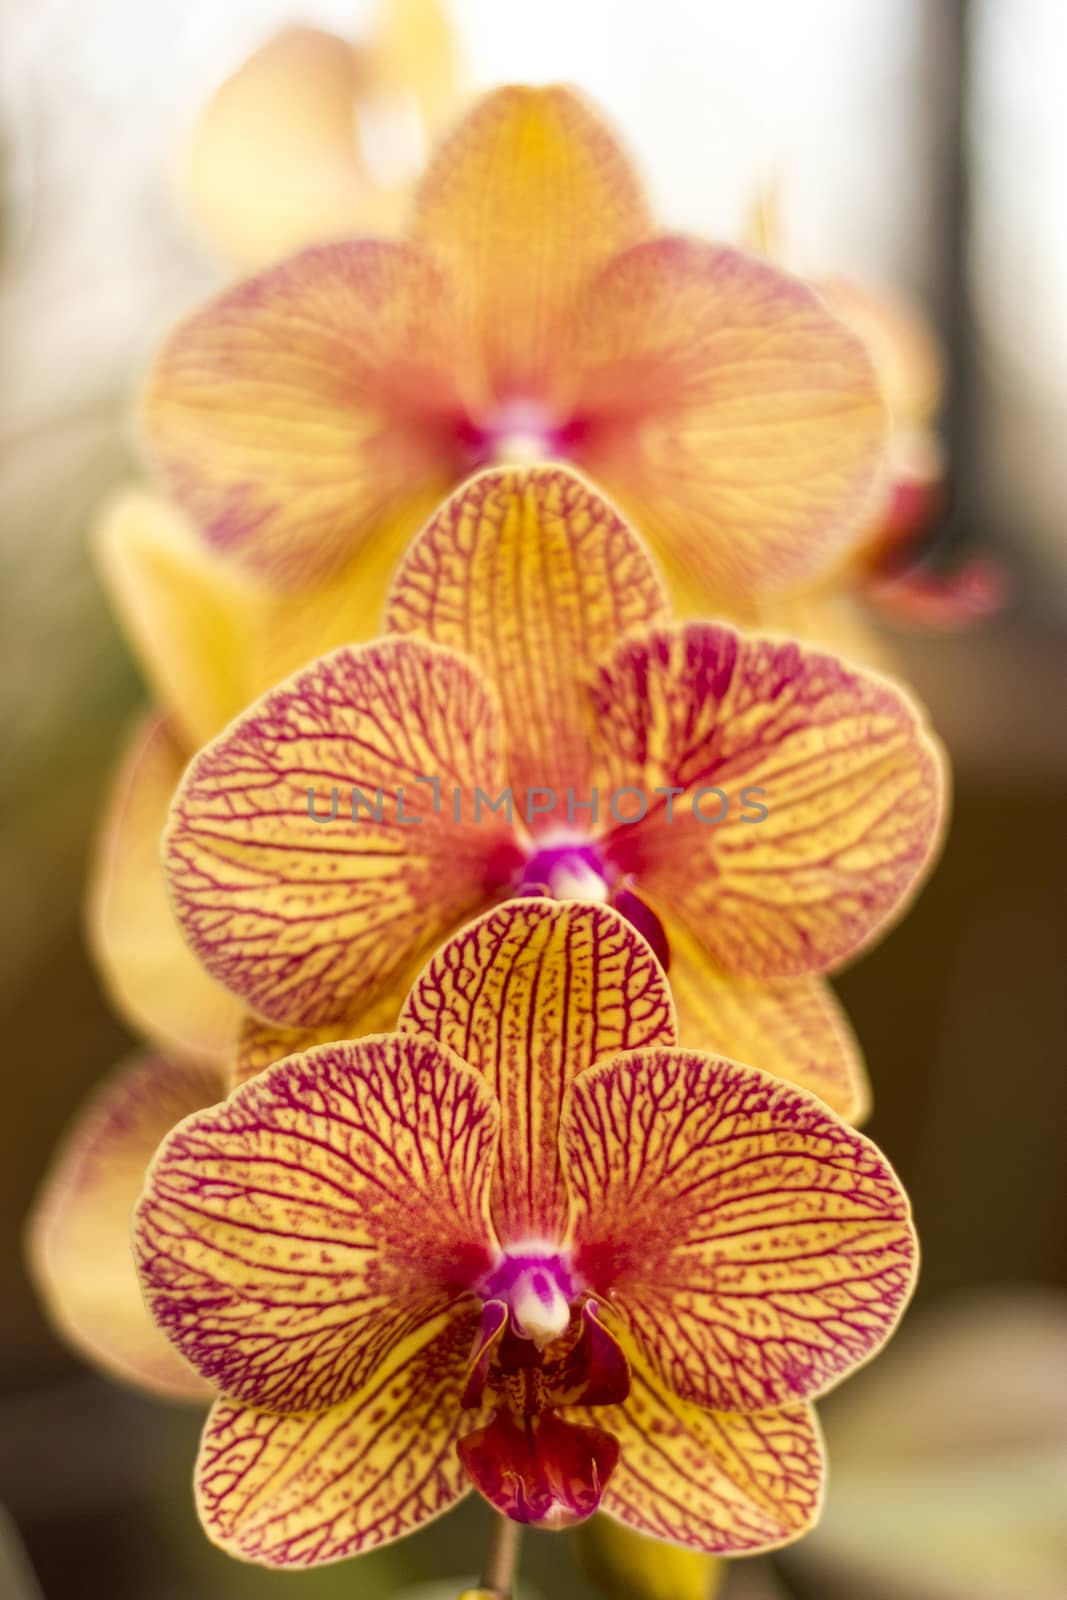 Orchid Trio by bkenney5@gmail.com